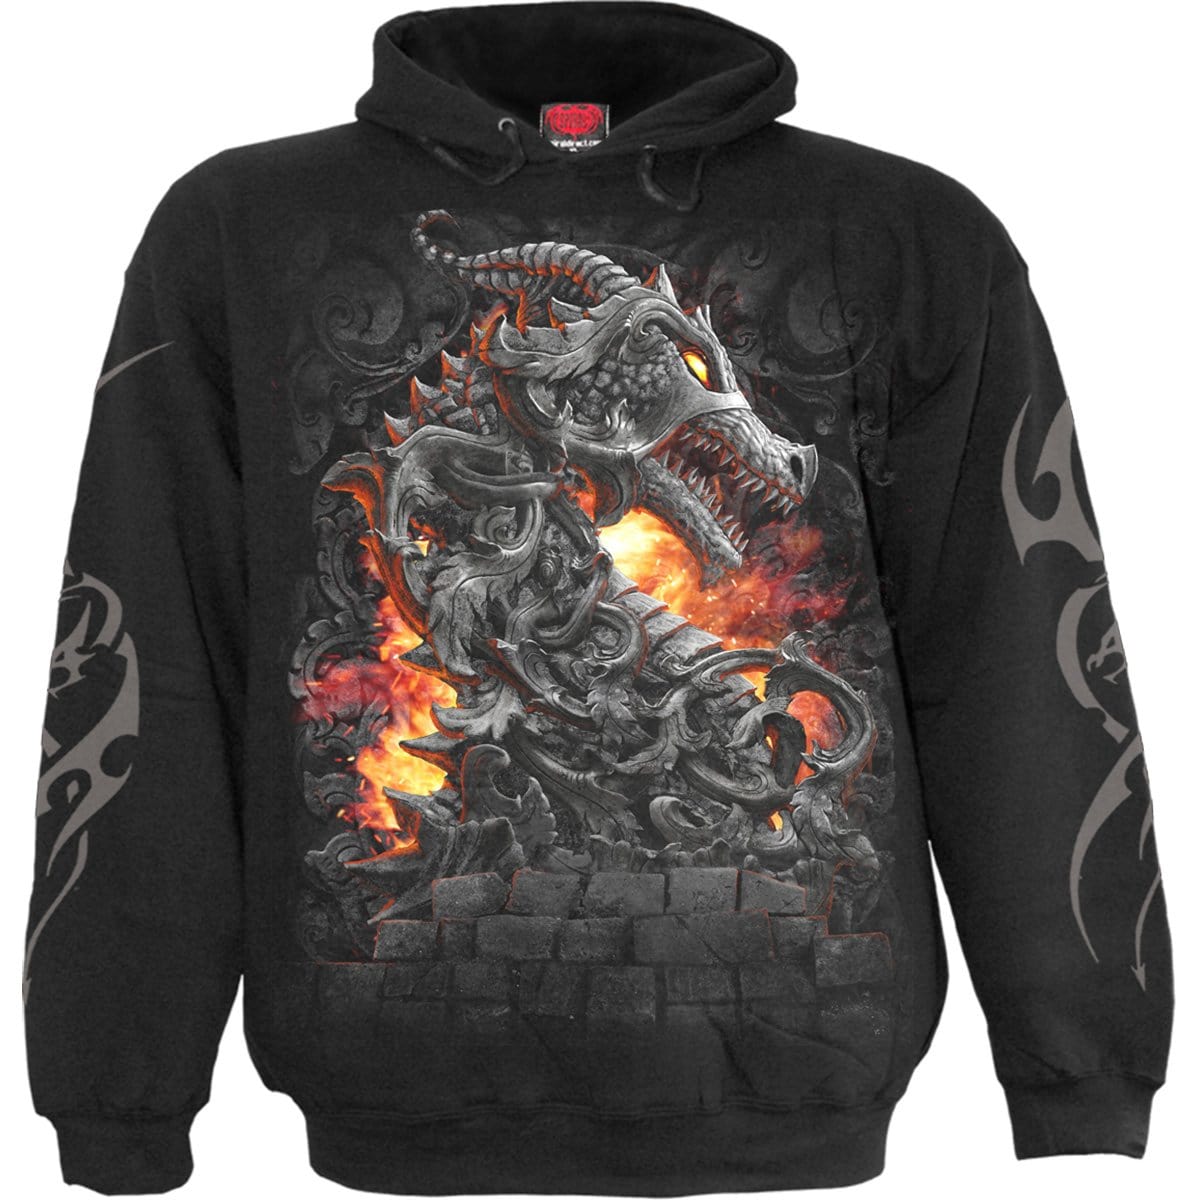 KEEPER OF THE FORTRESS - Hoody Black